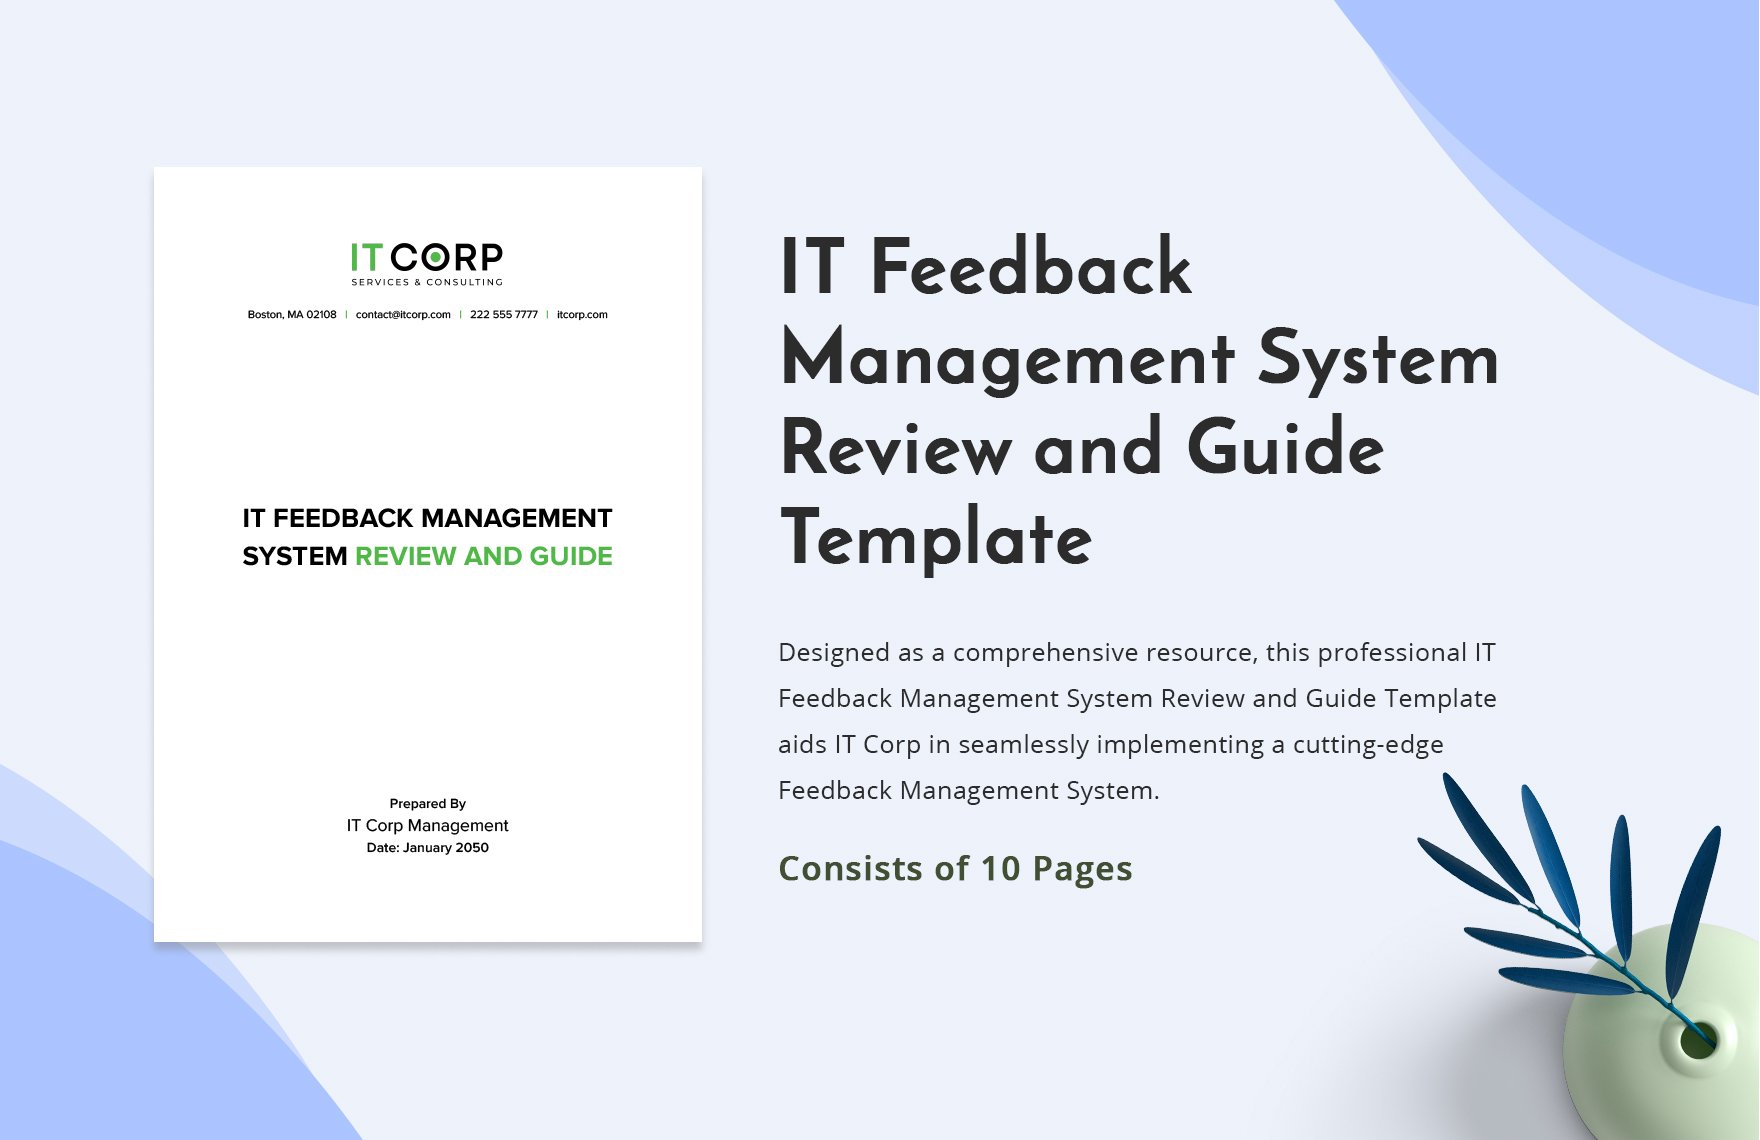 IT Feedback Management System Review and Guide Template in Word, Google Docs, PDF